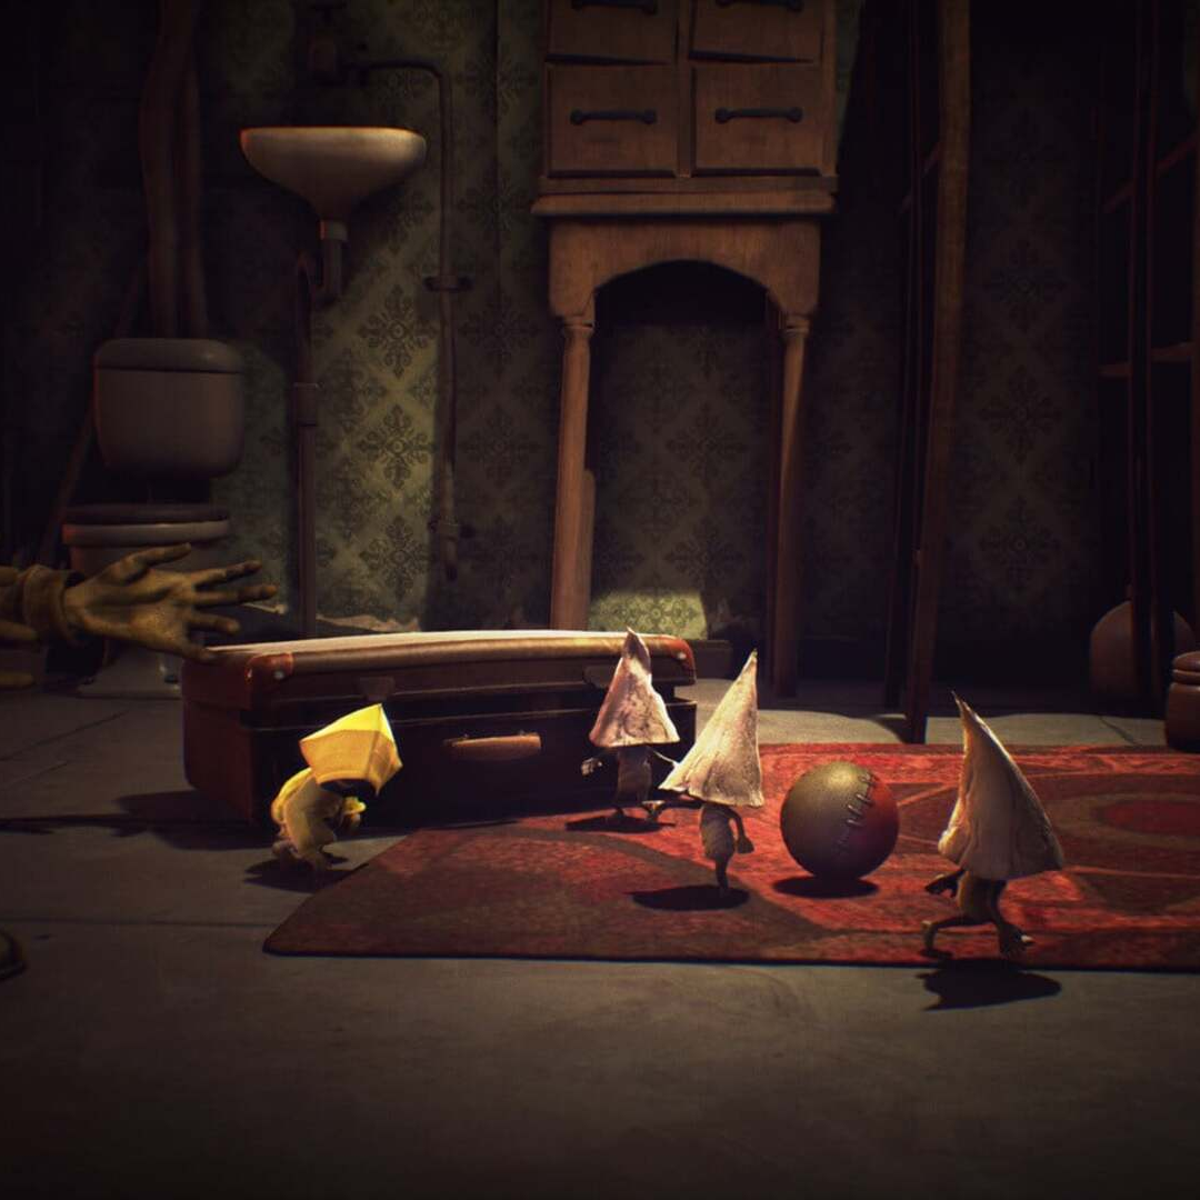 Little Nightmares comes to mobile on December 12